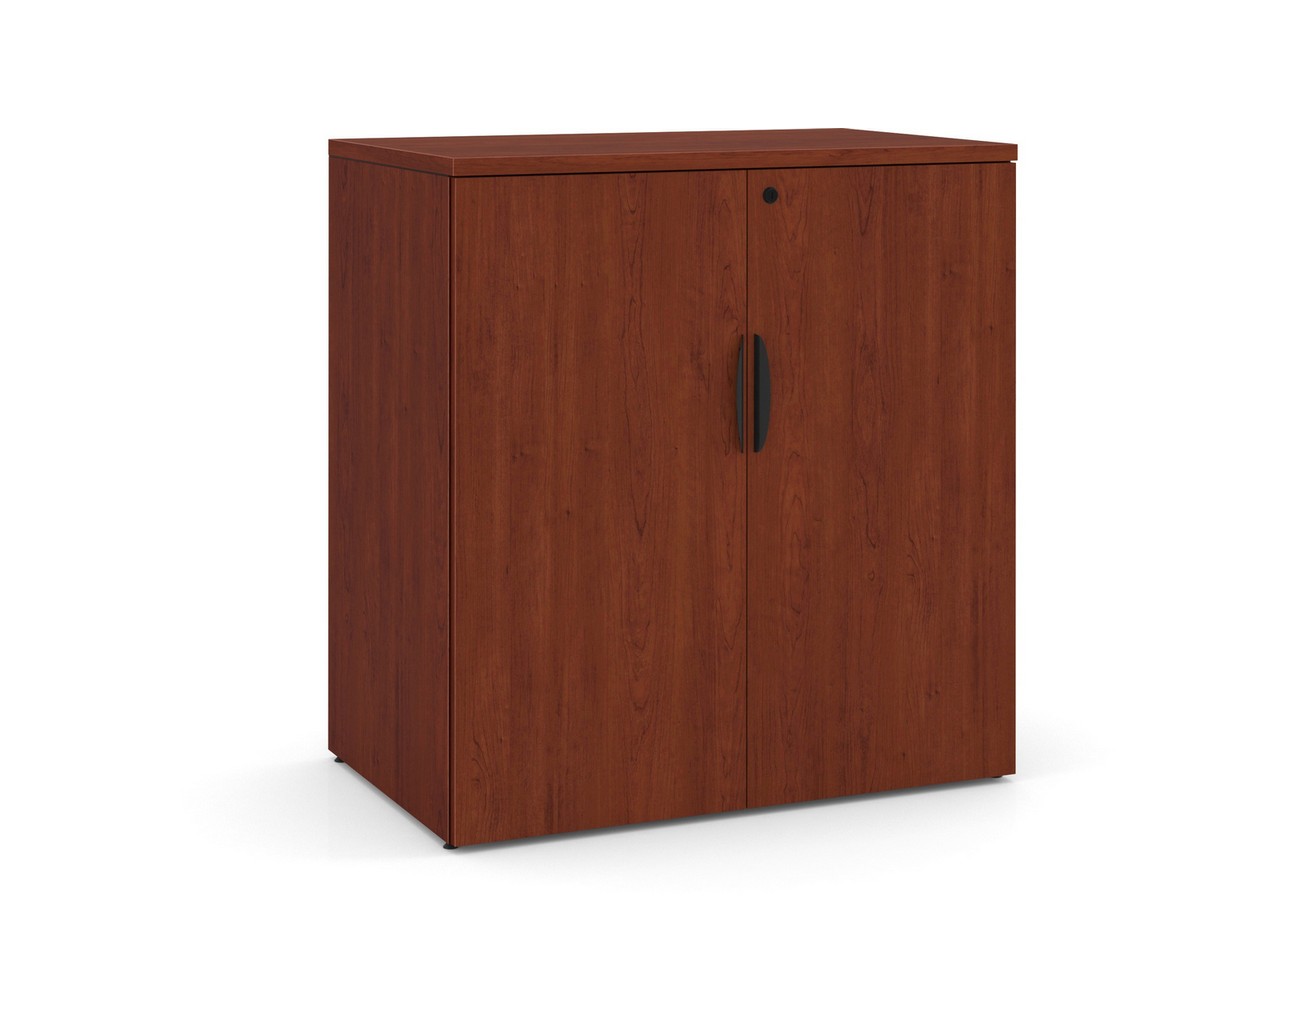 Locking Double Door Storage Cabinet 38 Inch with Cherry Finish